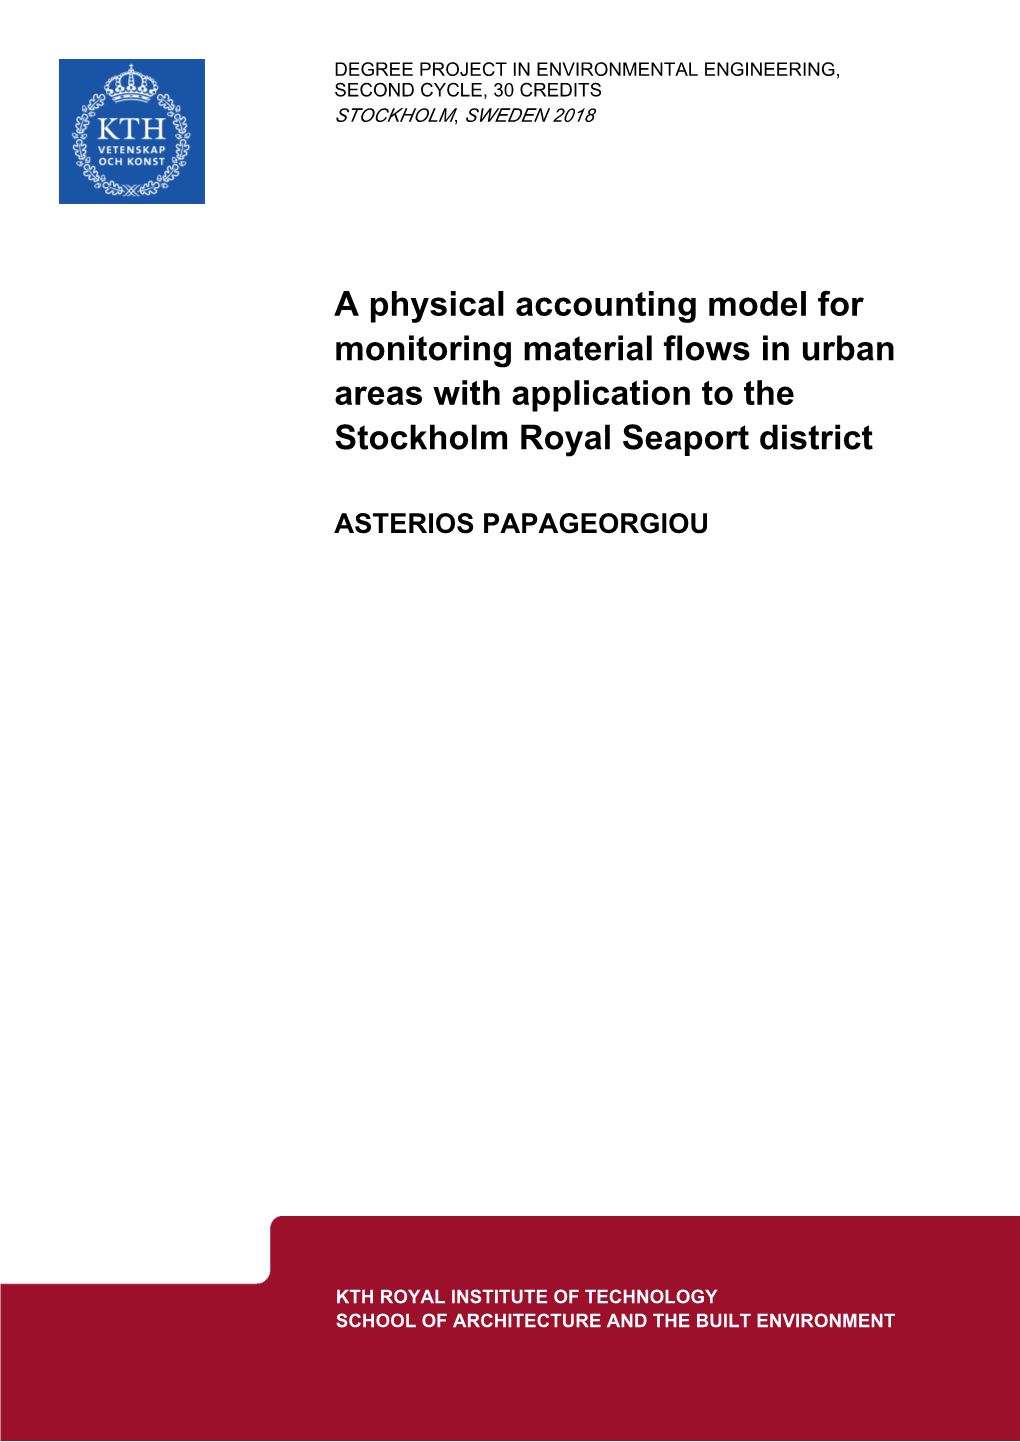 A Physical Accounting Model for Monitoring Material Flows in Urban Areas with Application to the Stockholm Royal Seaport District